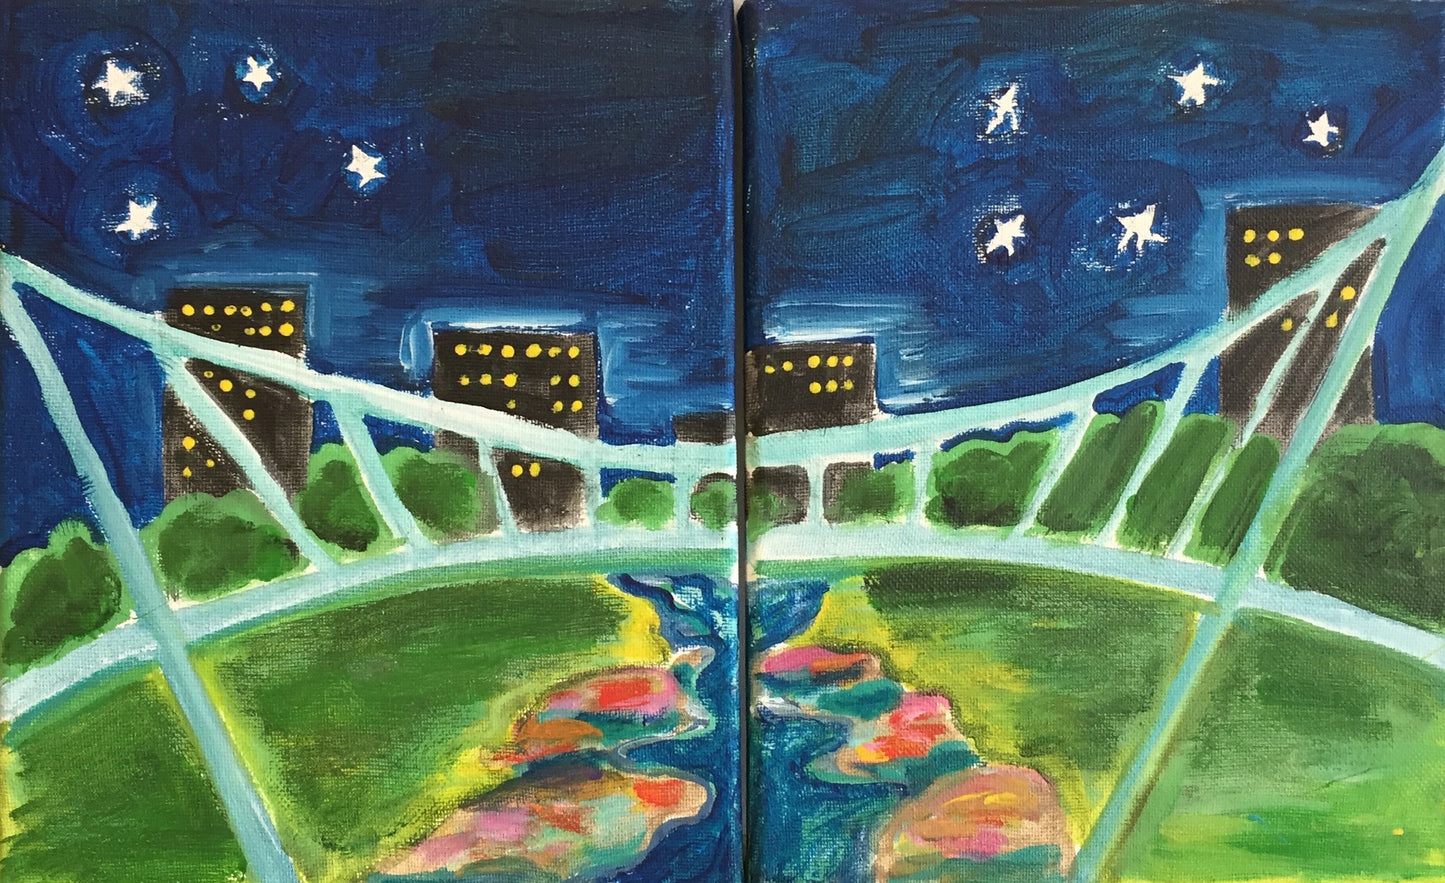 Couples Painting: Downtown Greenville Night